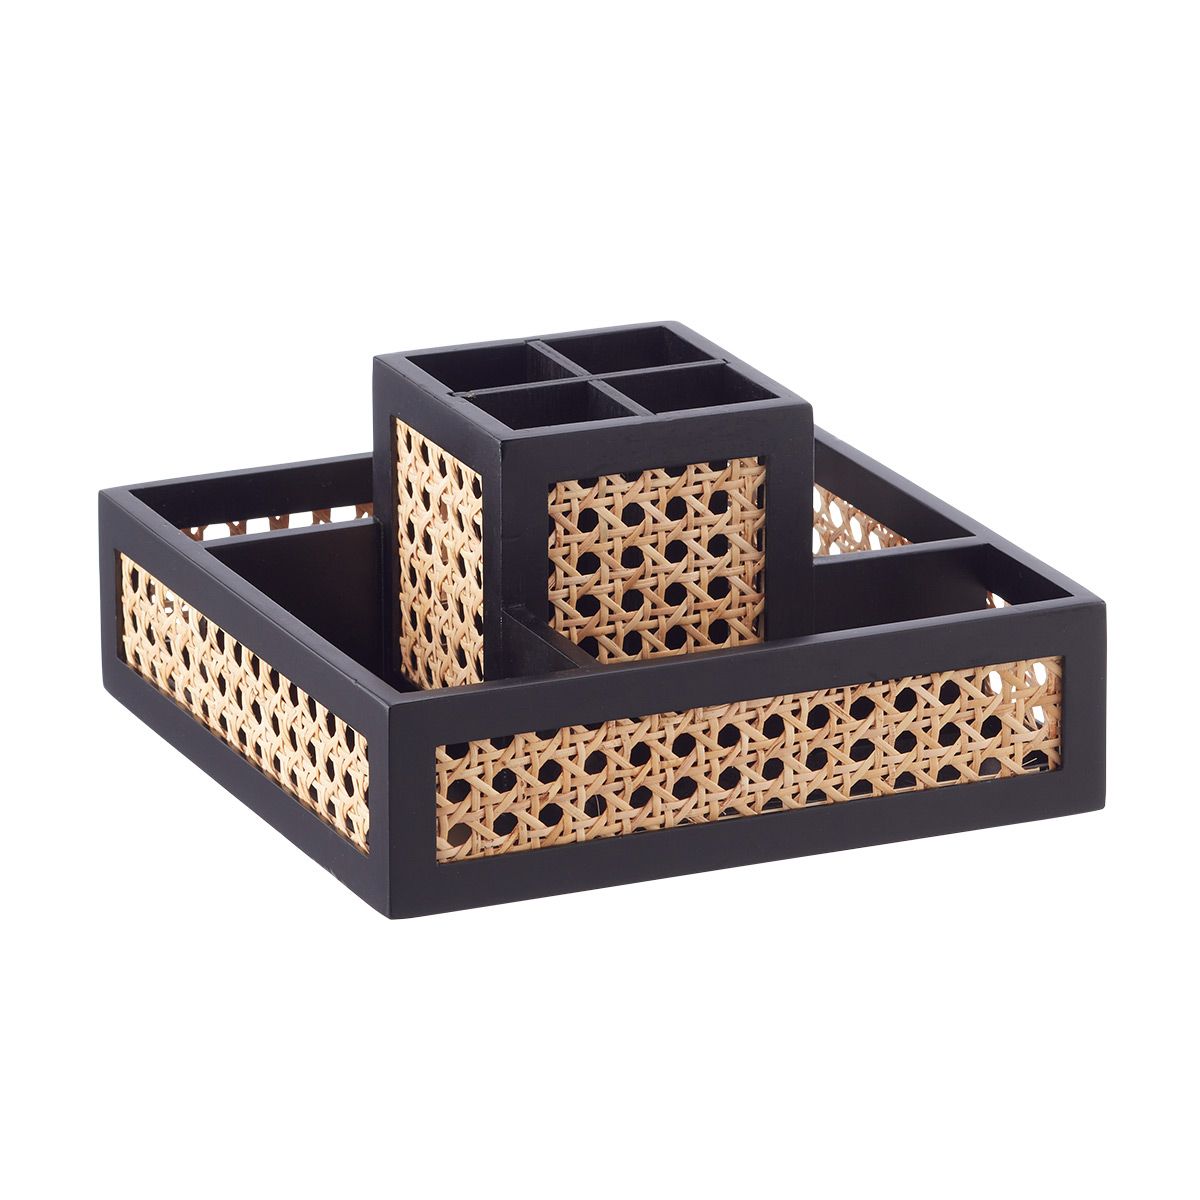 The Container Store Artisan Rattan Cane Square Rotating Organizer | The Container Store